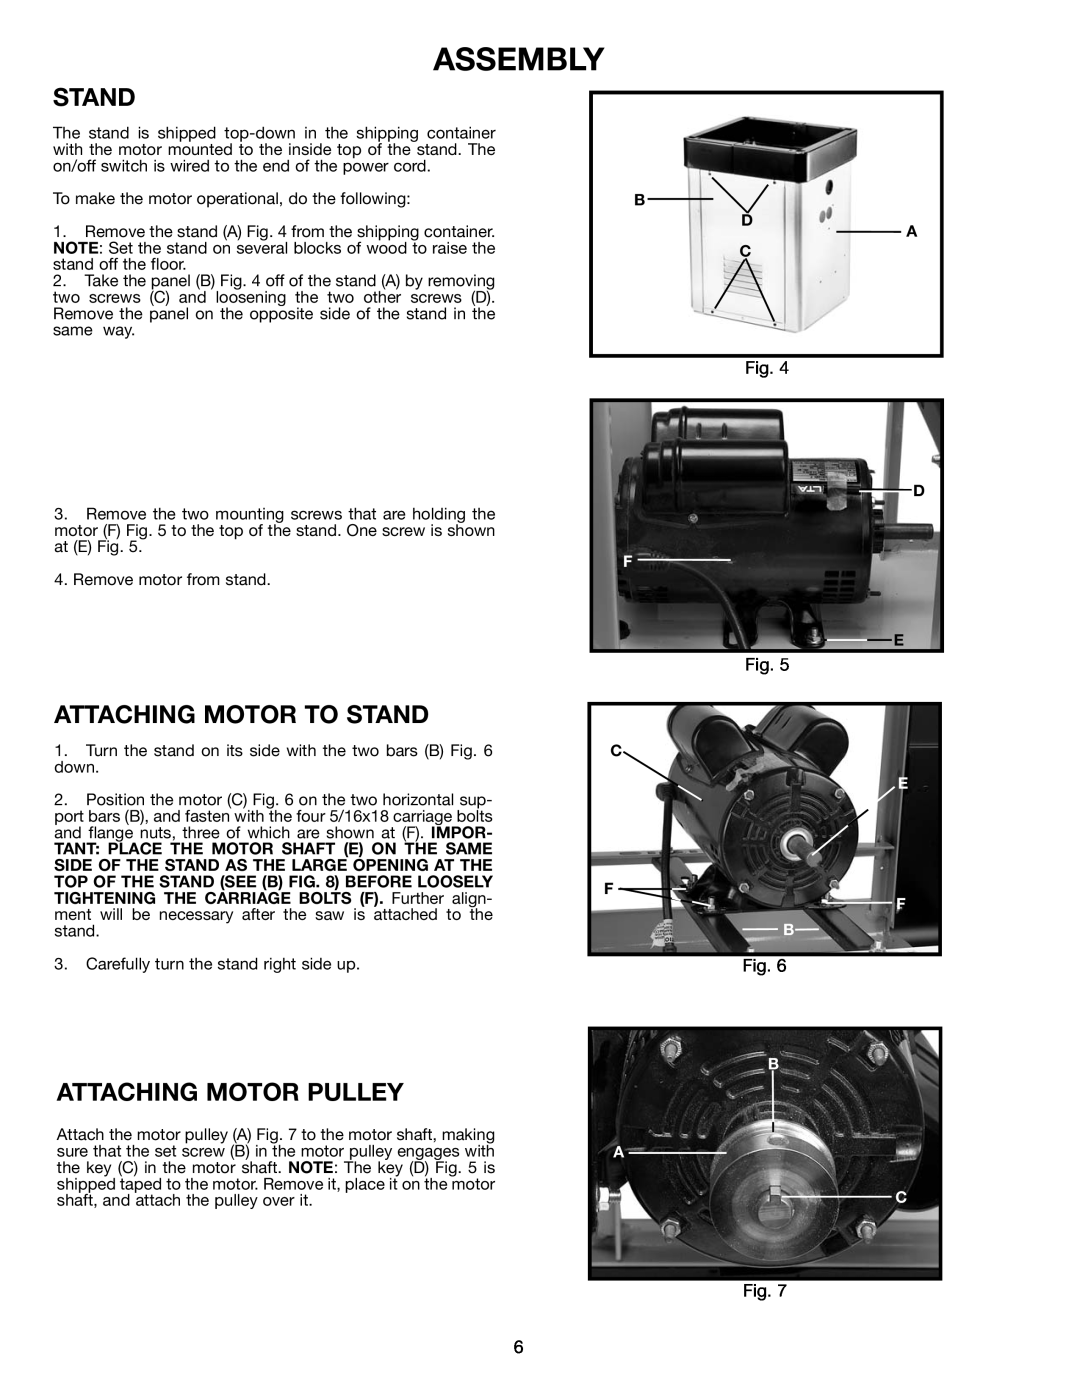 Delta 28-299A, 28-241 instruction manual Assembly, Attaching Motor To Stand, Attaching Motor Pulley, B D C, B A C 